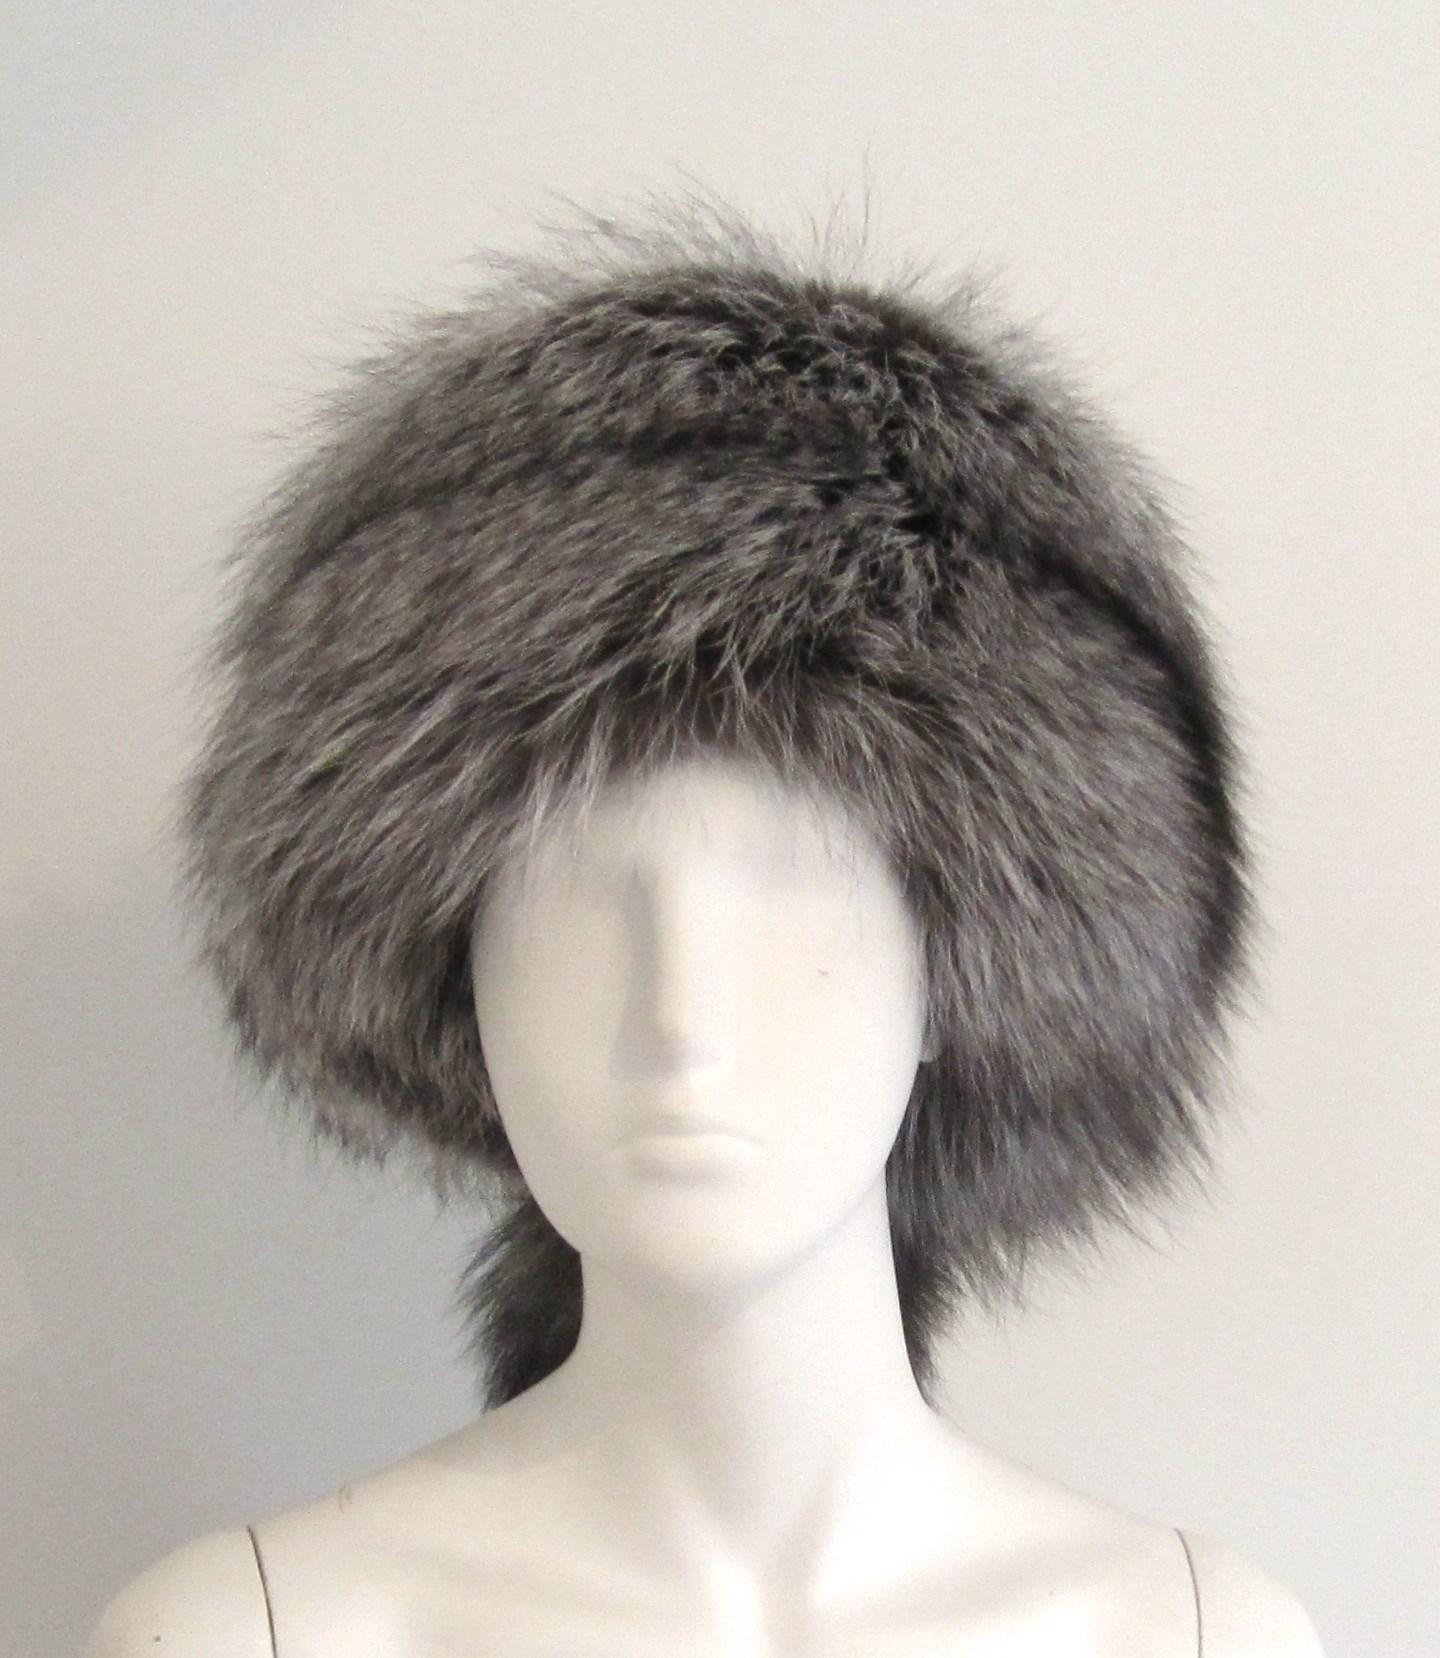 Fox Fur Trapper hat with a tail. This is a 22 in. This has a pull string inside to make it smaller if need be. We have more fox hats listed.  Please be sure to check our storefront for more furs from Mink, Fitch, Fox, and Lamb. We also have hundreds